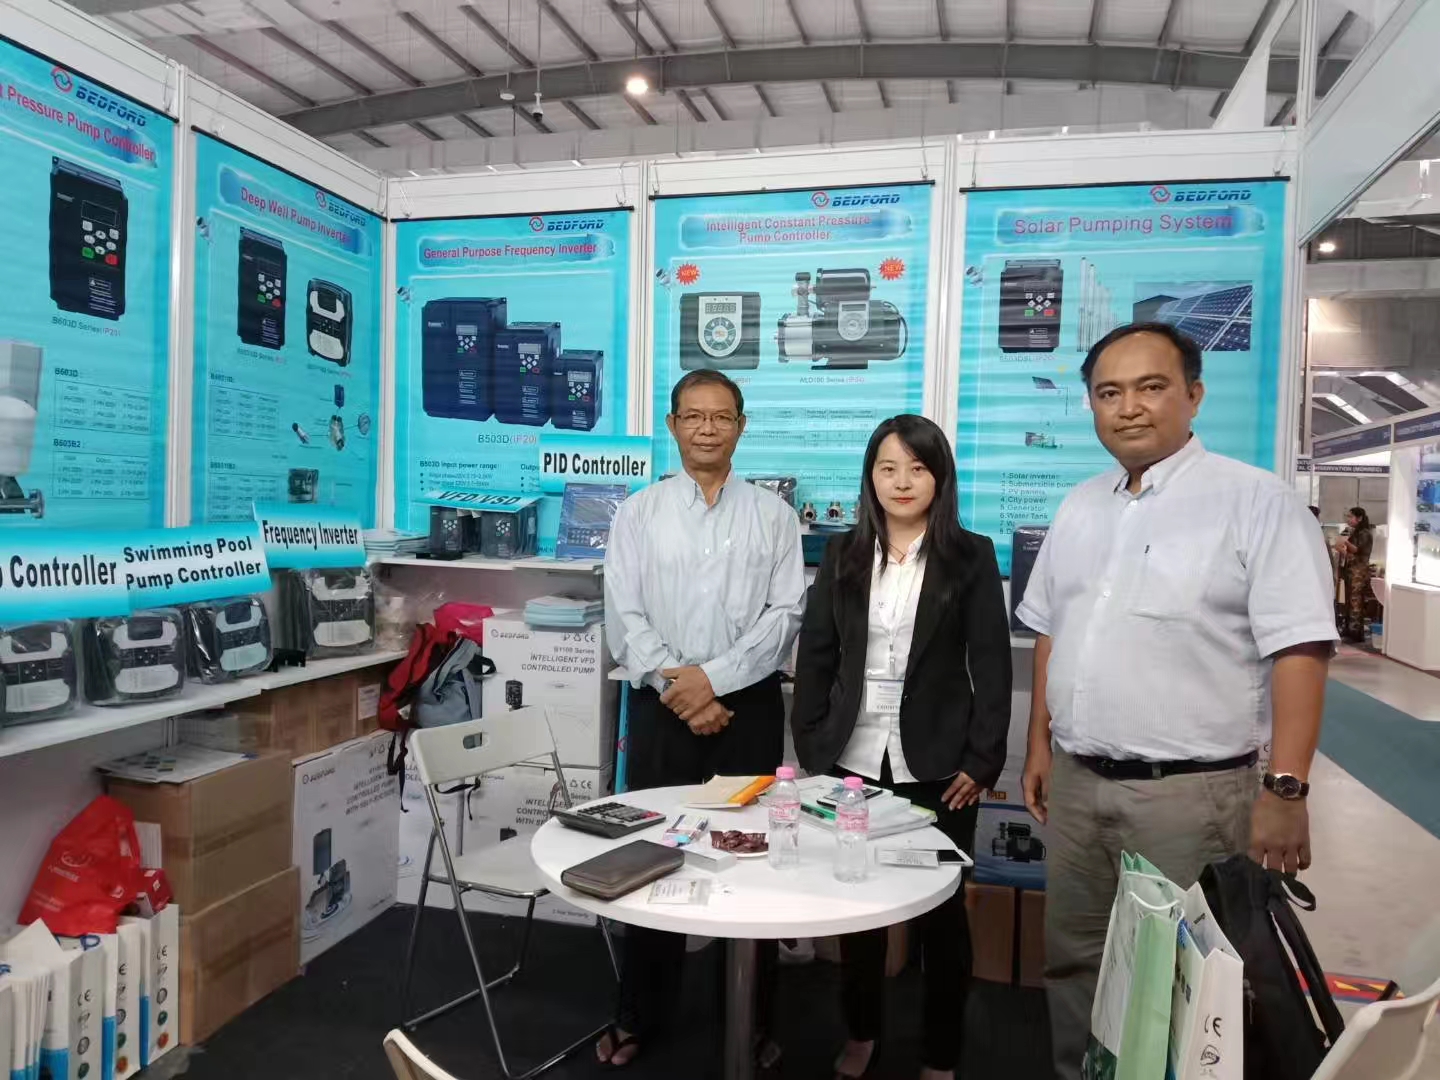 2018.10.11-2018.10.13, participated in the 2018 Myanmar International Water Treatment Exhibition